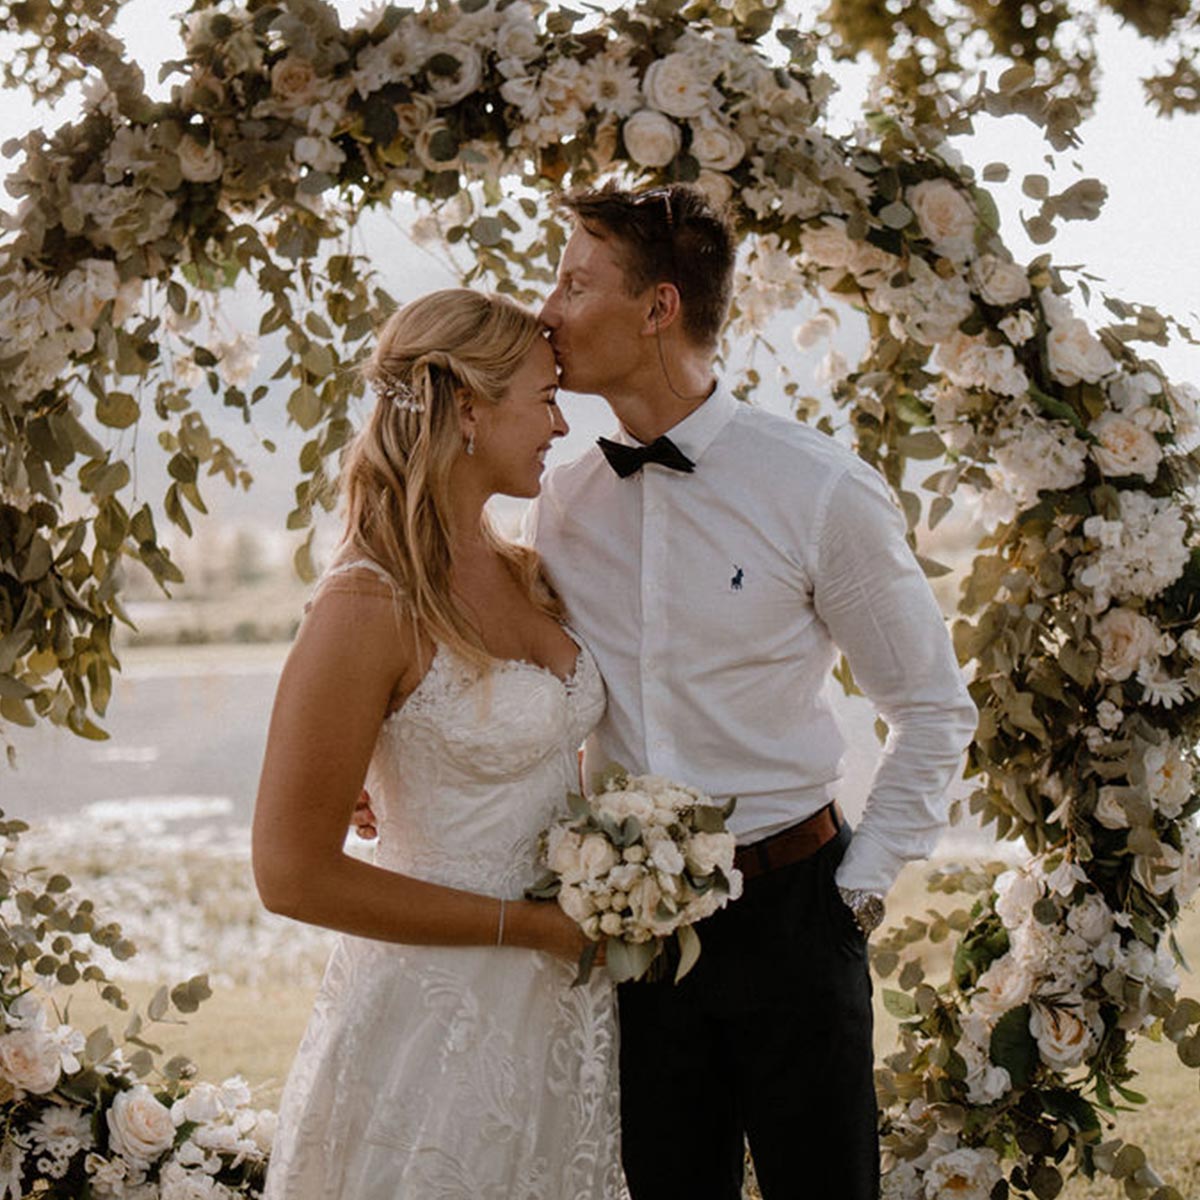 Bride and groom share a tender moment under a lush floral arch adorned with white roses and greenery, celebrating their special day. Fabulous Flowers and Gifts. Weddings.